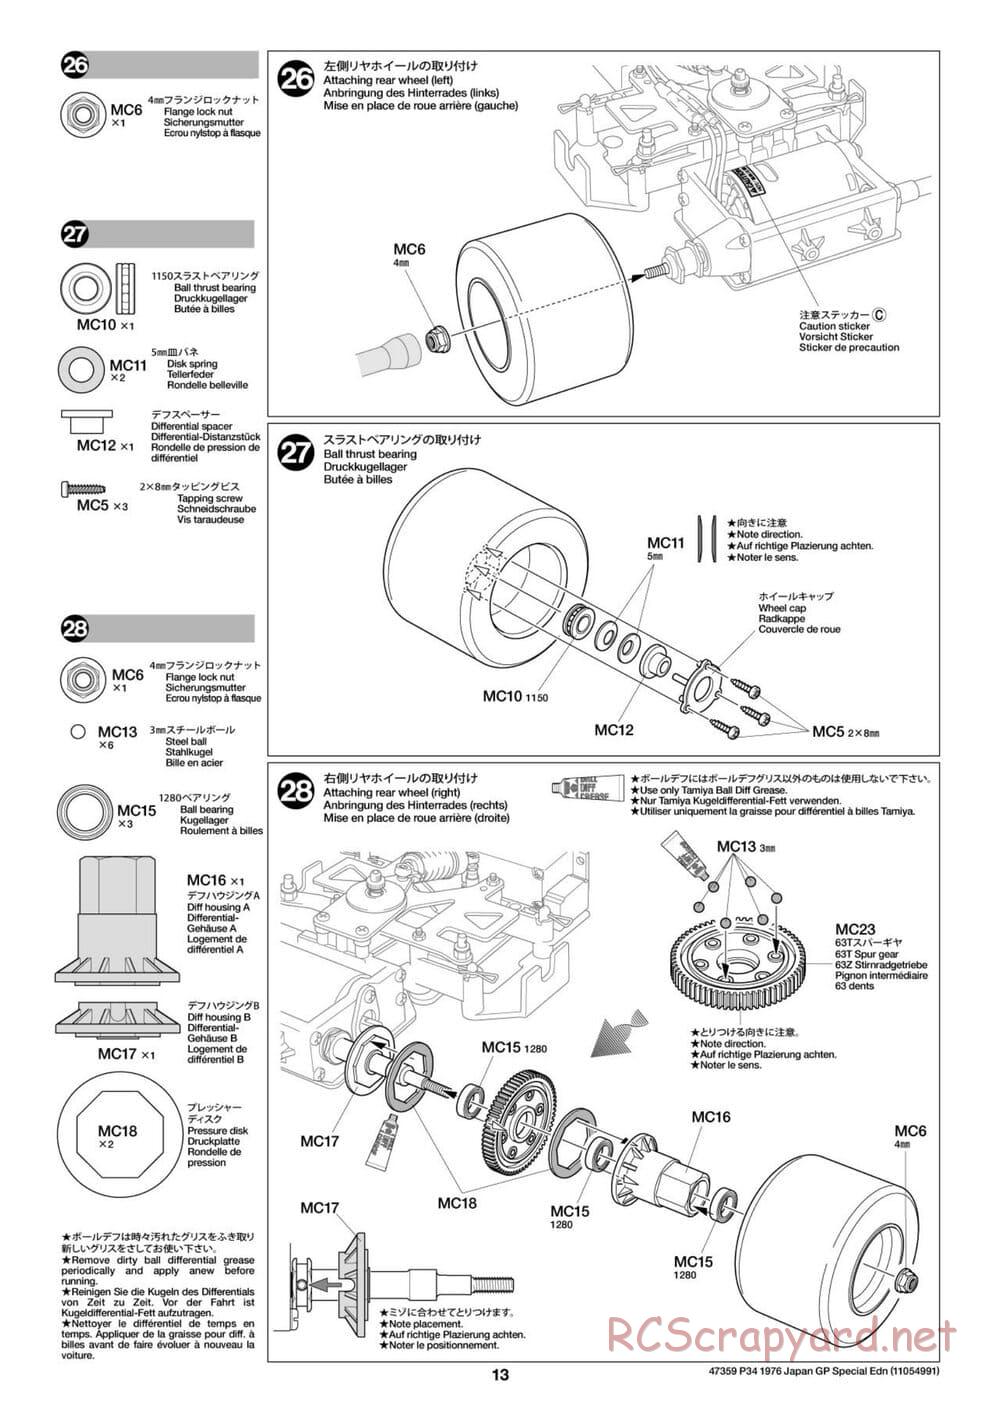 Tamiya - Tyrrell P34 1976 Japan Grand Prix Special - F103-6W Chassis - Manual - Page 13